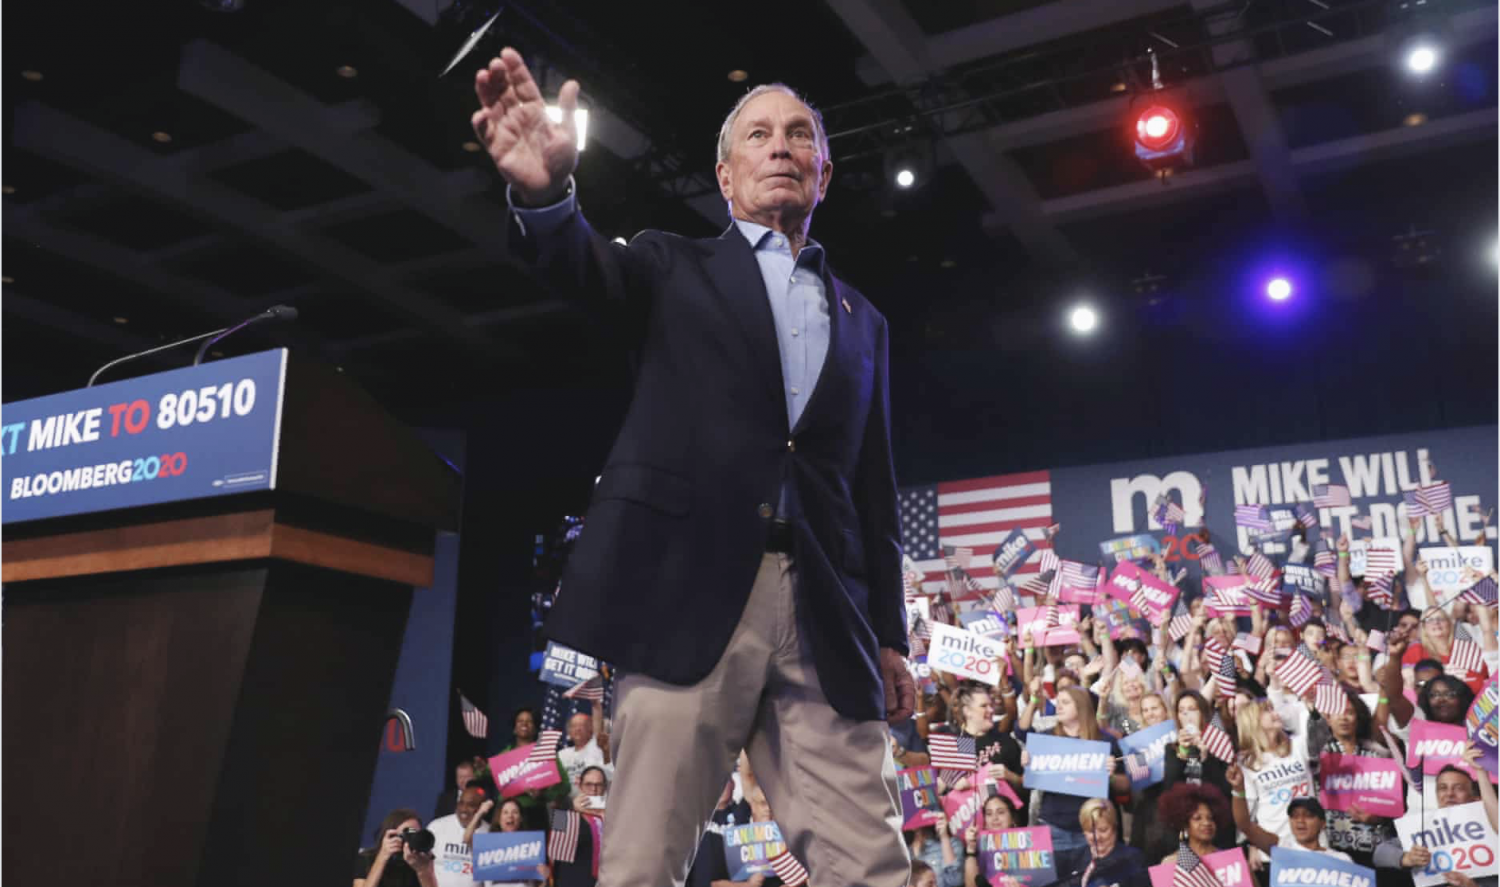 Bloomberg ends presidential run and endorses Biden after Super Tuesday rejection